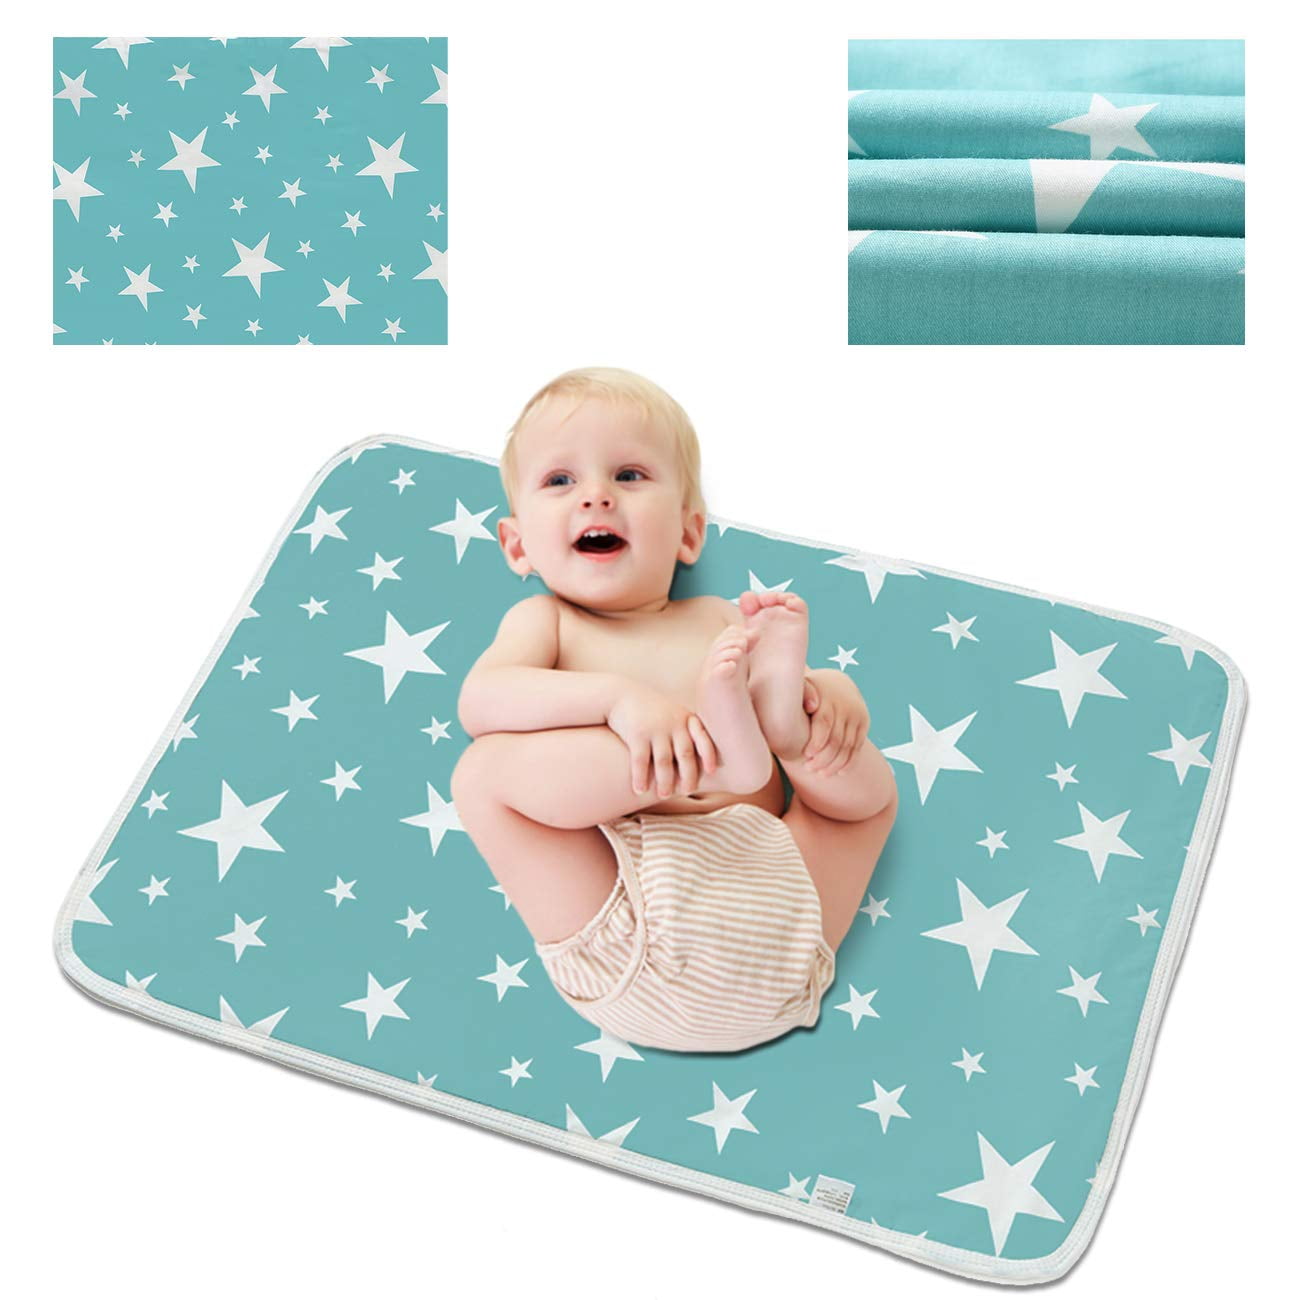 Washable Baby Infant Diaper Nappy Urine Mat Kid Bedding Changing Cover Pad UK 